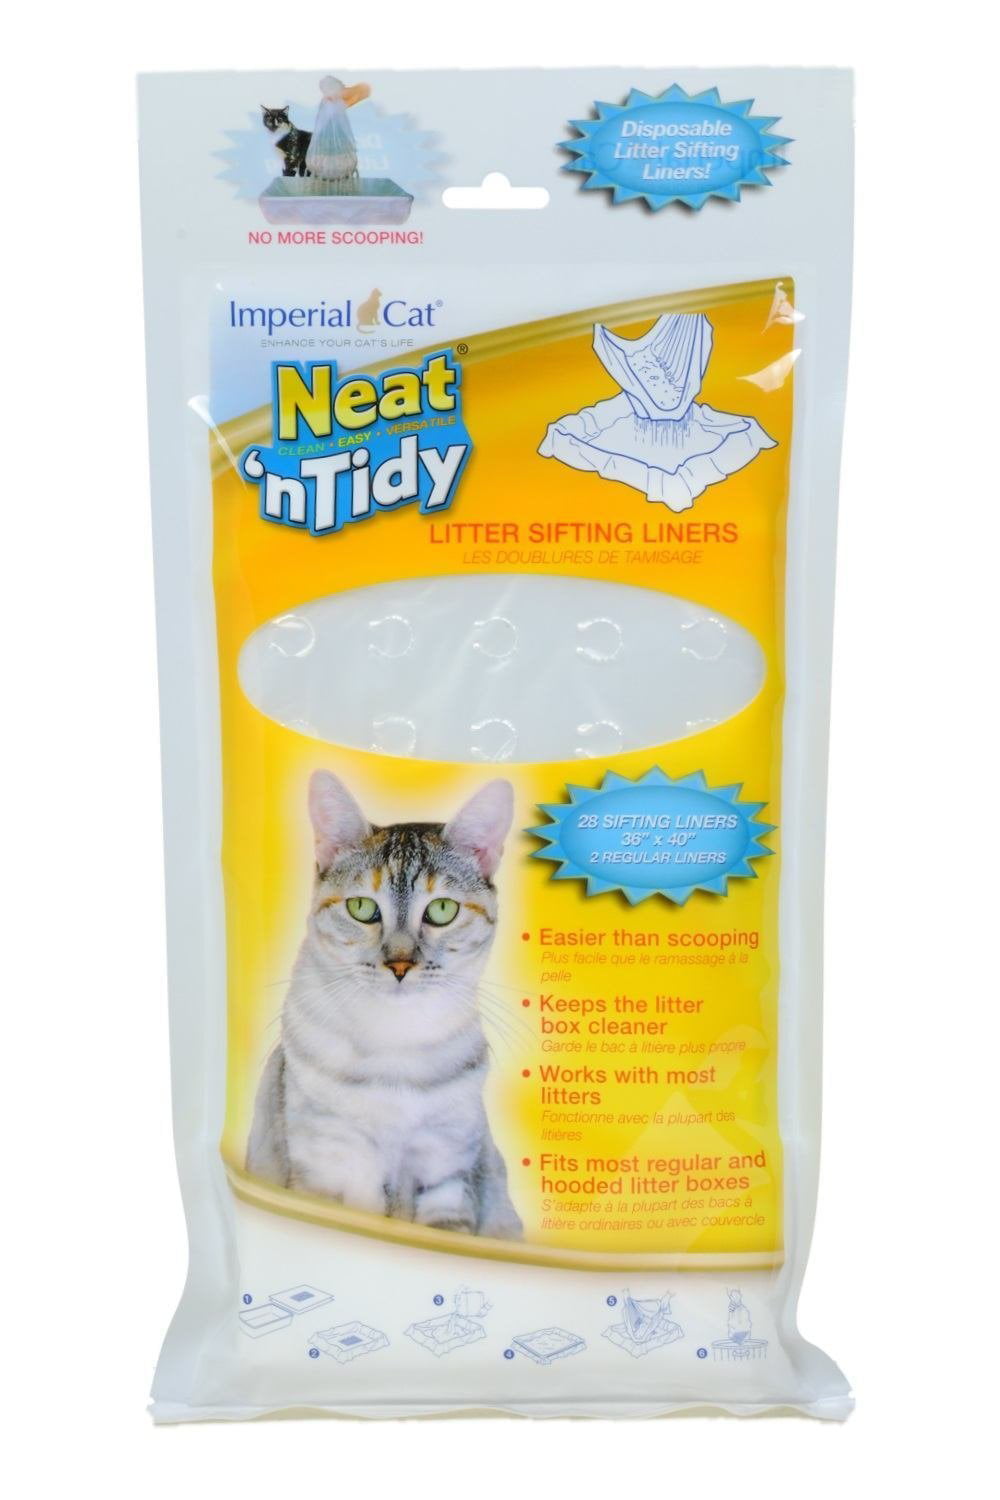 Neat N Tidy Litter Sifting Liners by Imperial Cat, 2 Pack